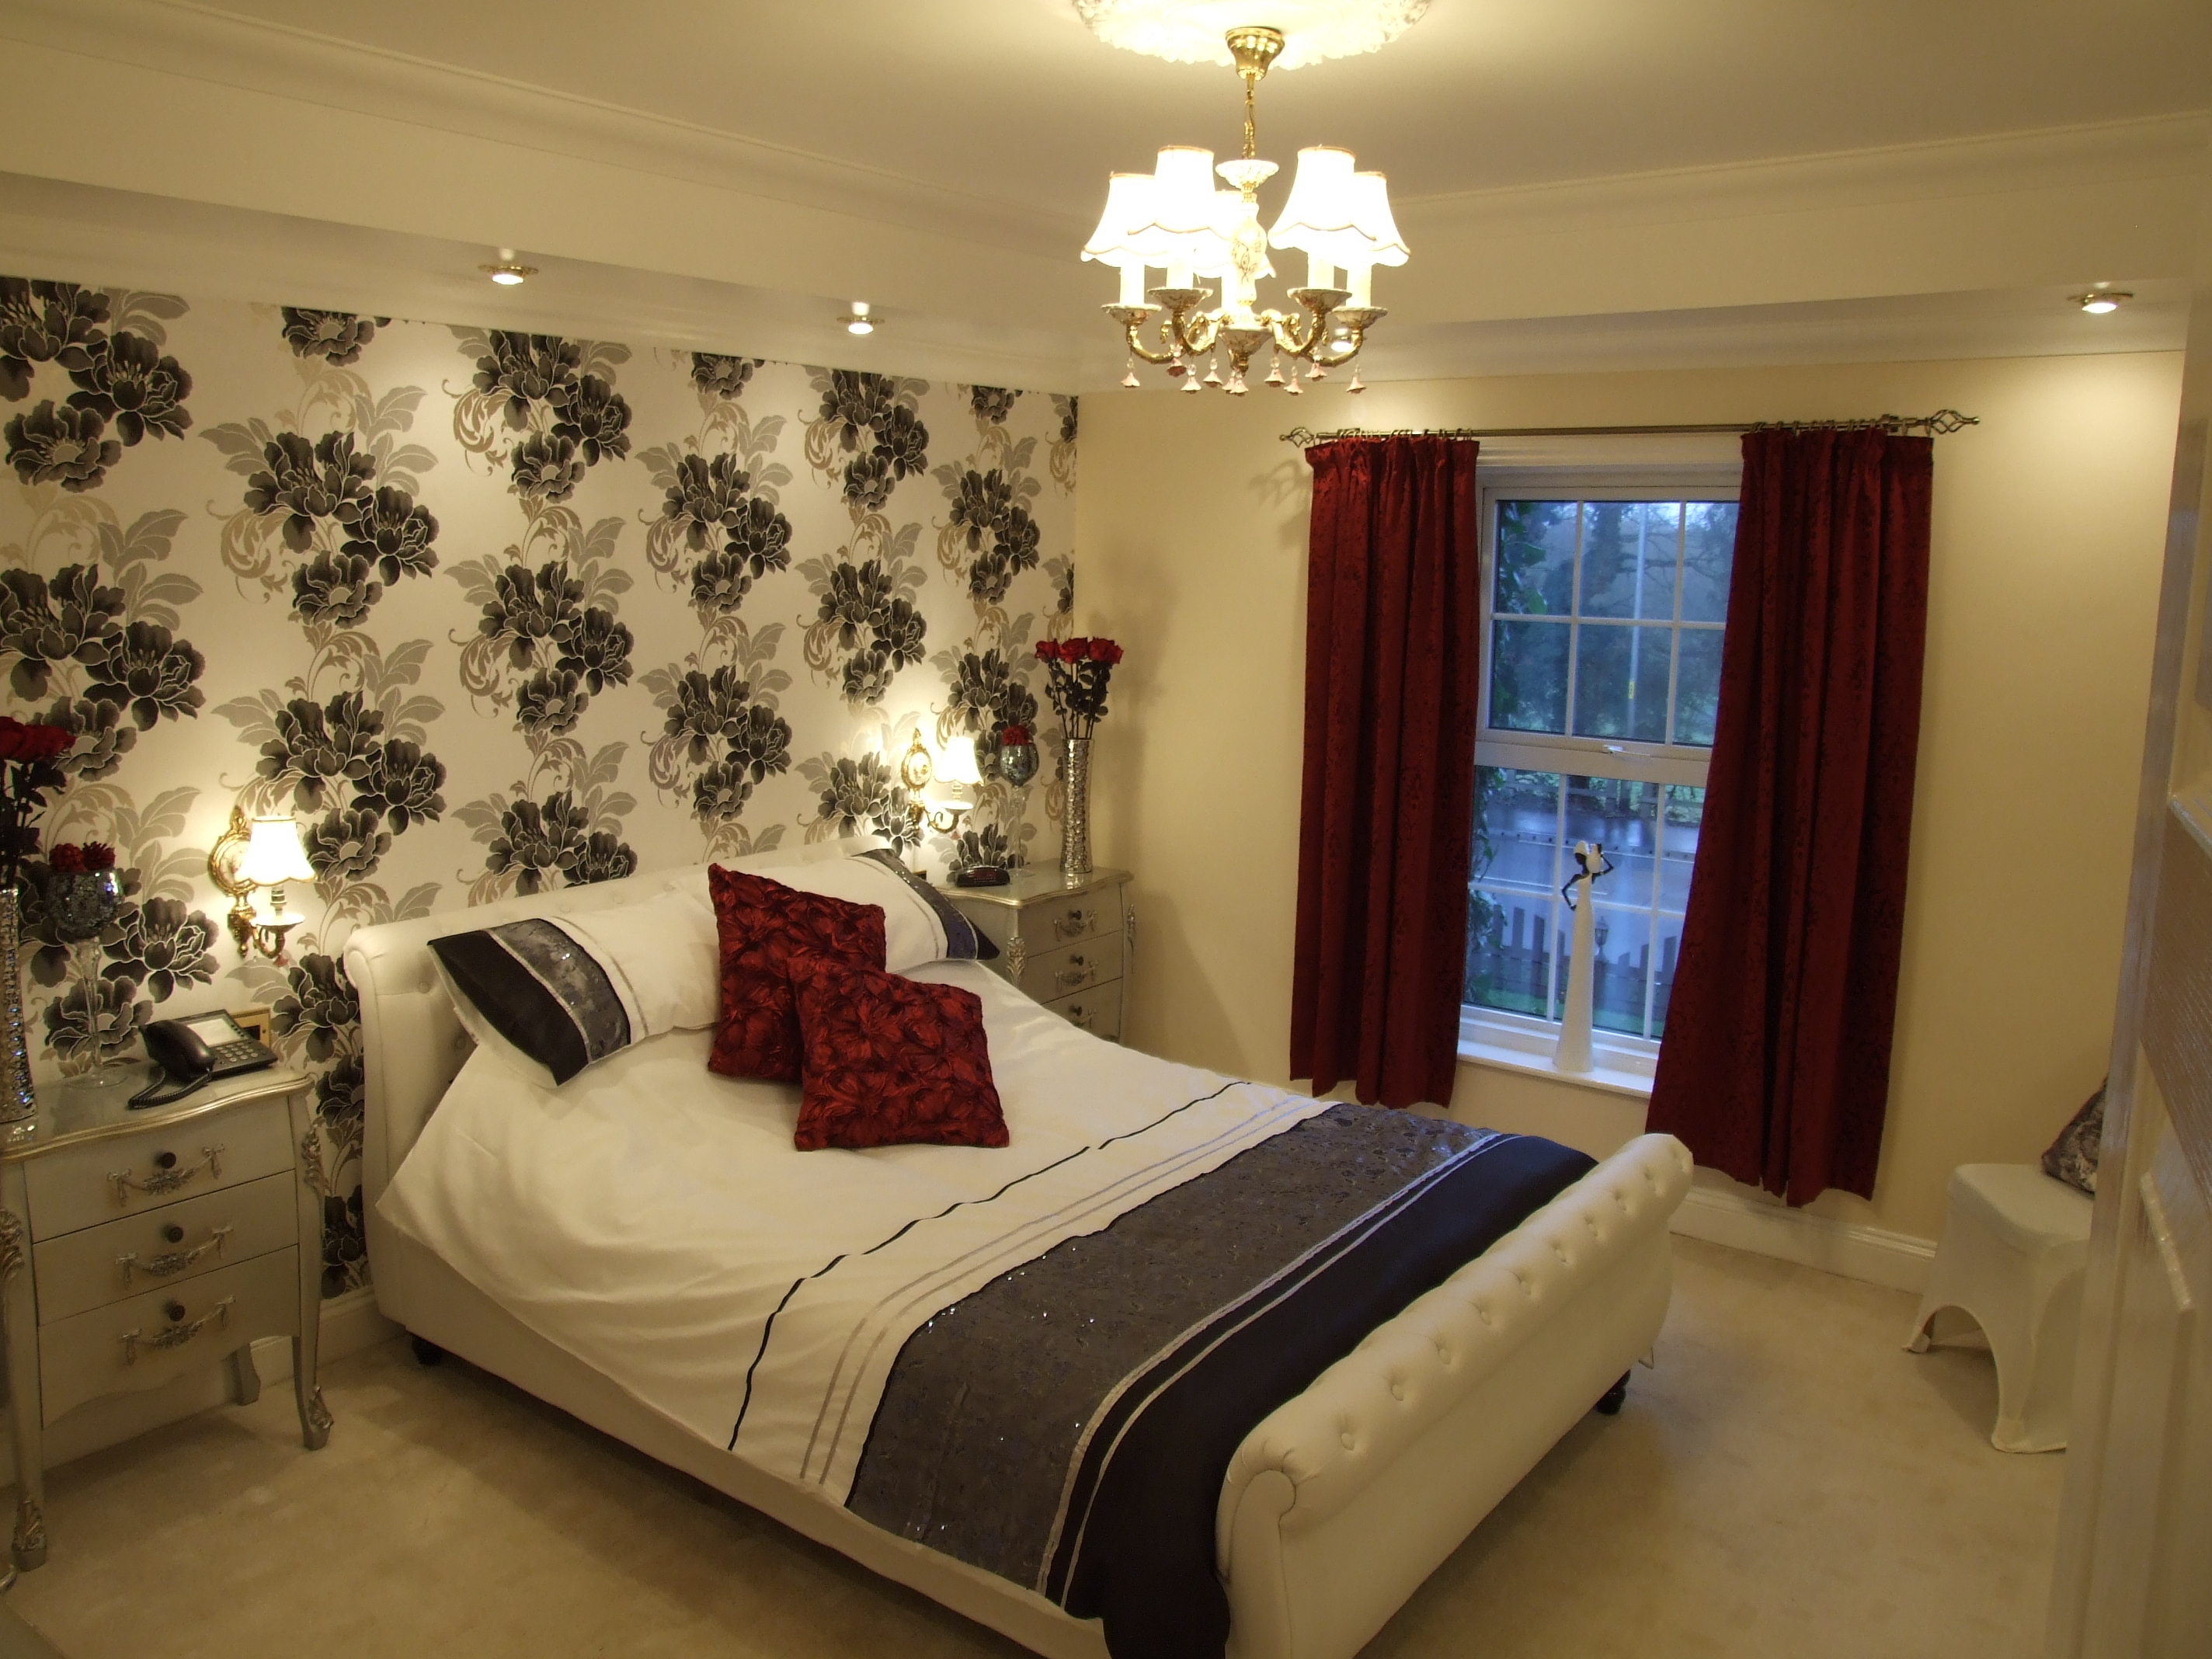 Double room-Luxury-Ensuite with Jet bath-Countryside view-Bridal Room